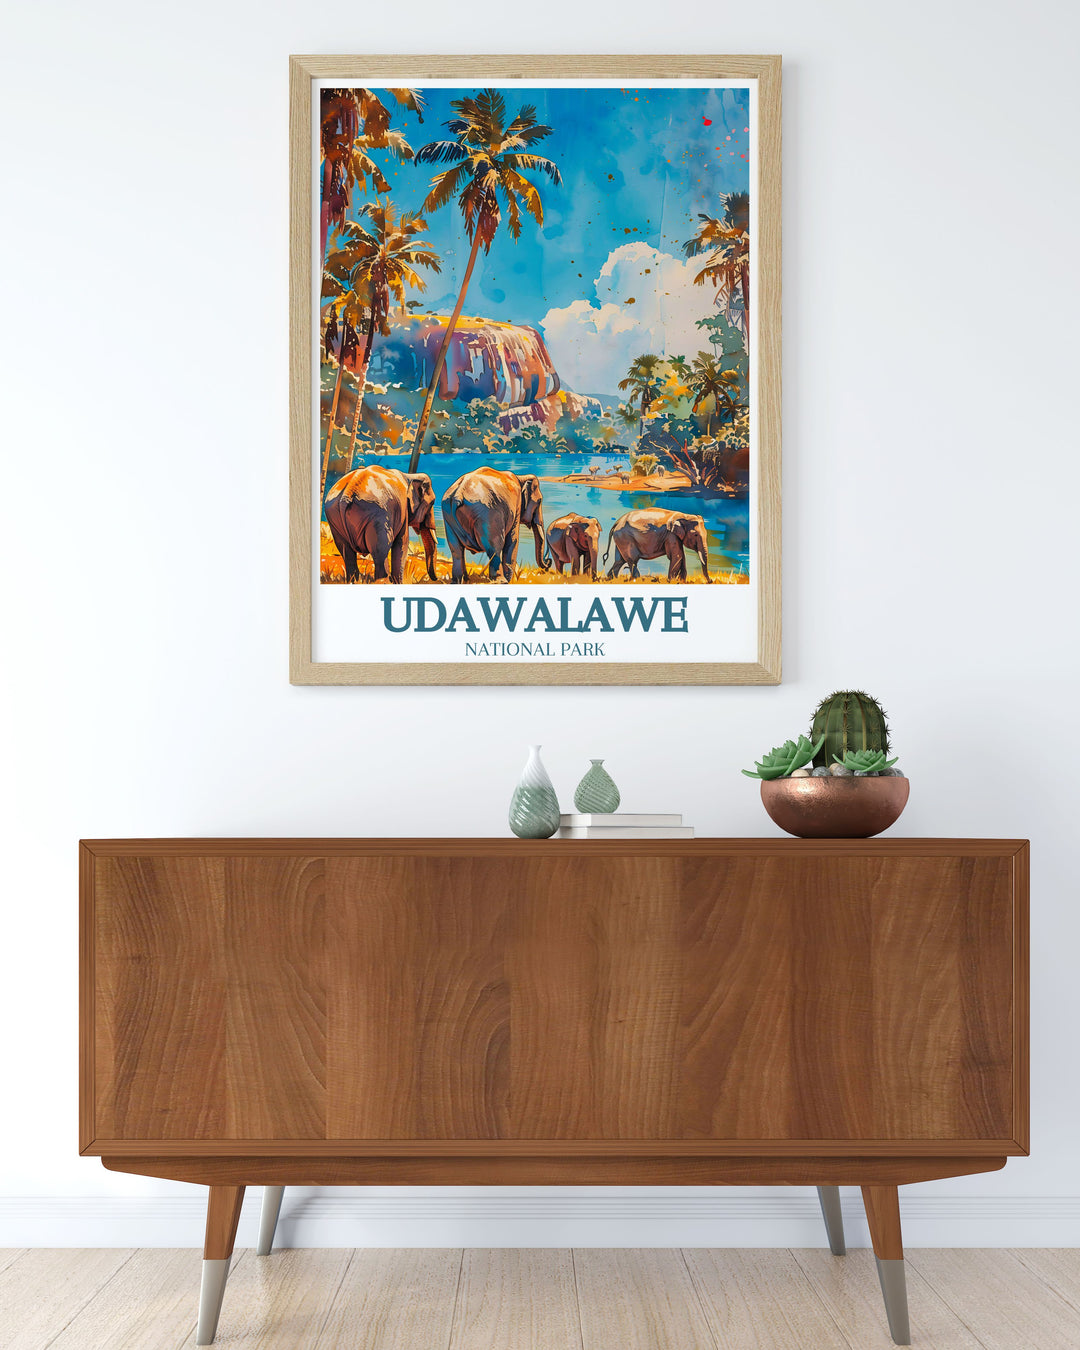 High quality Udawalawe Reservoir Walawe River artwork perfect for bringing a piece of Sri Lankas stunning national parks into your home ideal for nature enthusiasts and those who love to travel and explore.